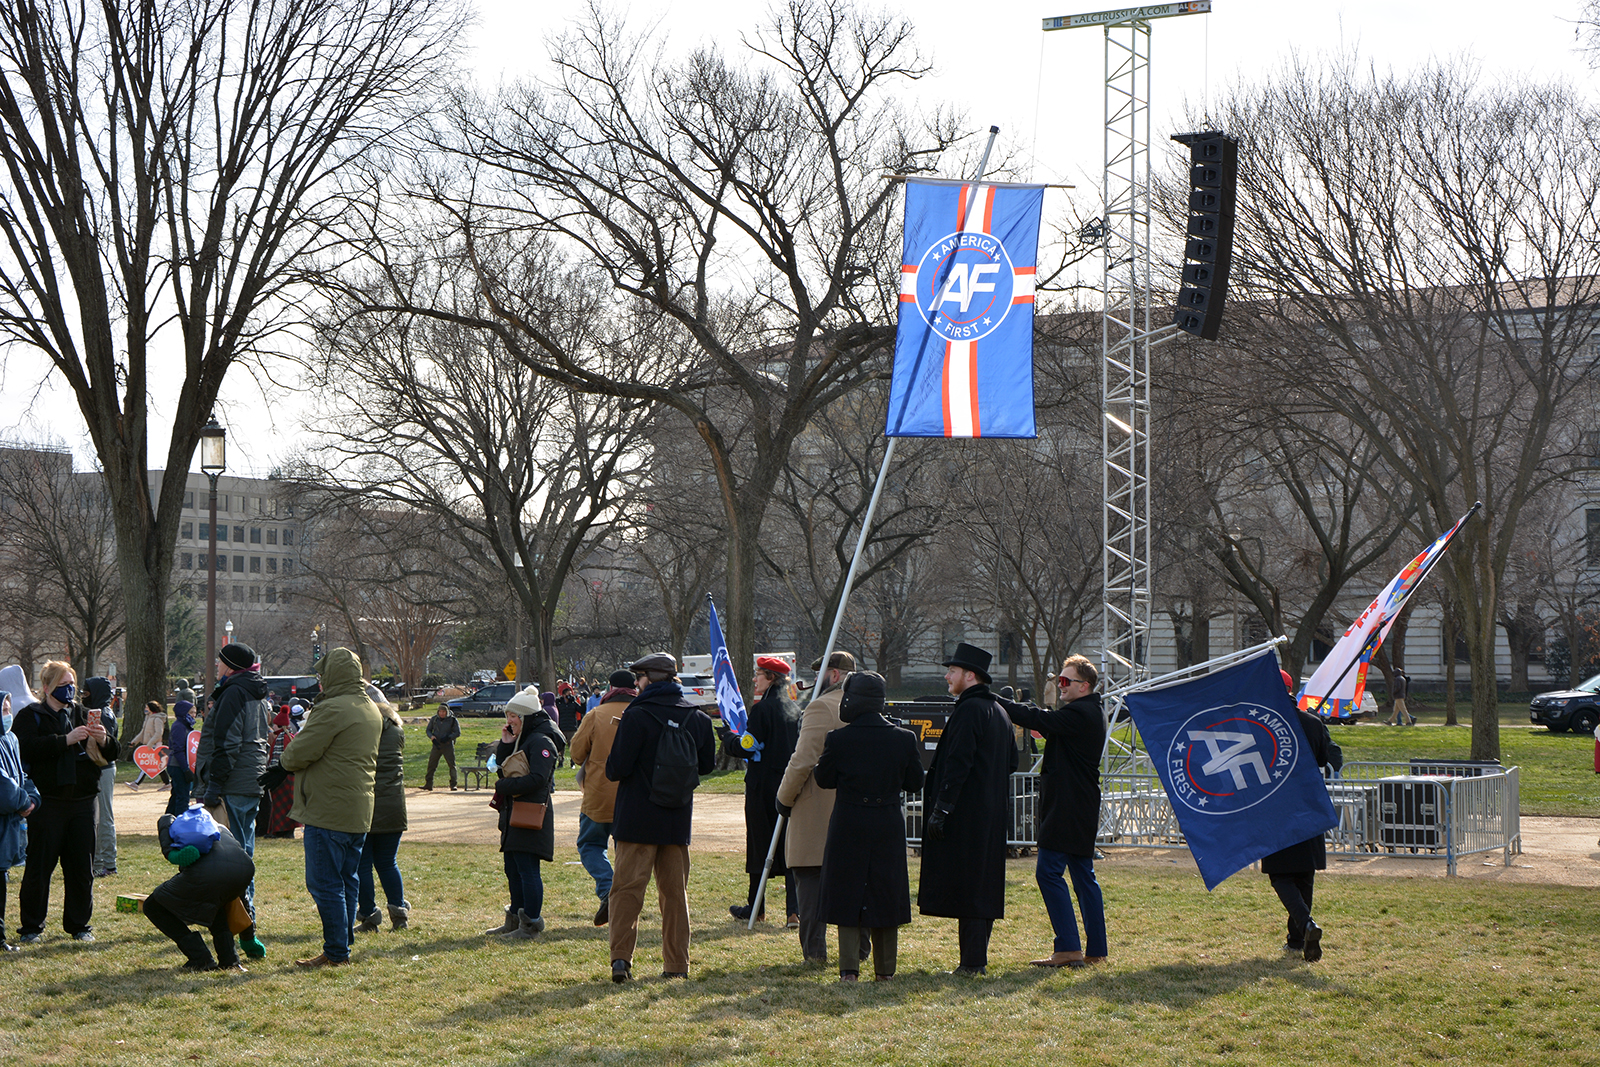 Scenes from the annual March for Life, Friday, Jan. 21, 2022, in Washington, D.C. RNS photo by Jack Jenkins